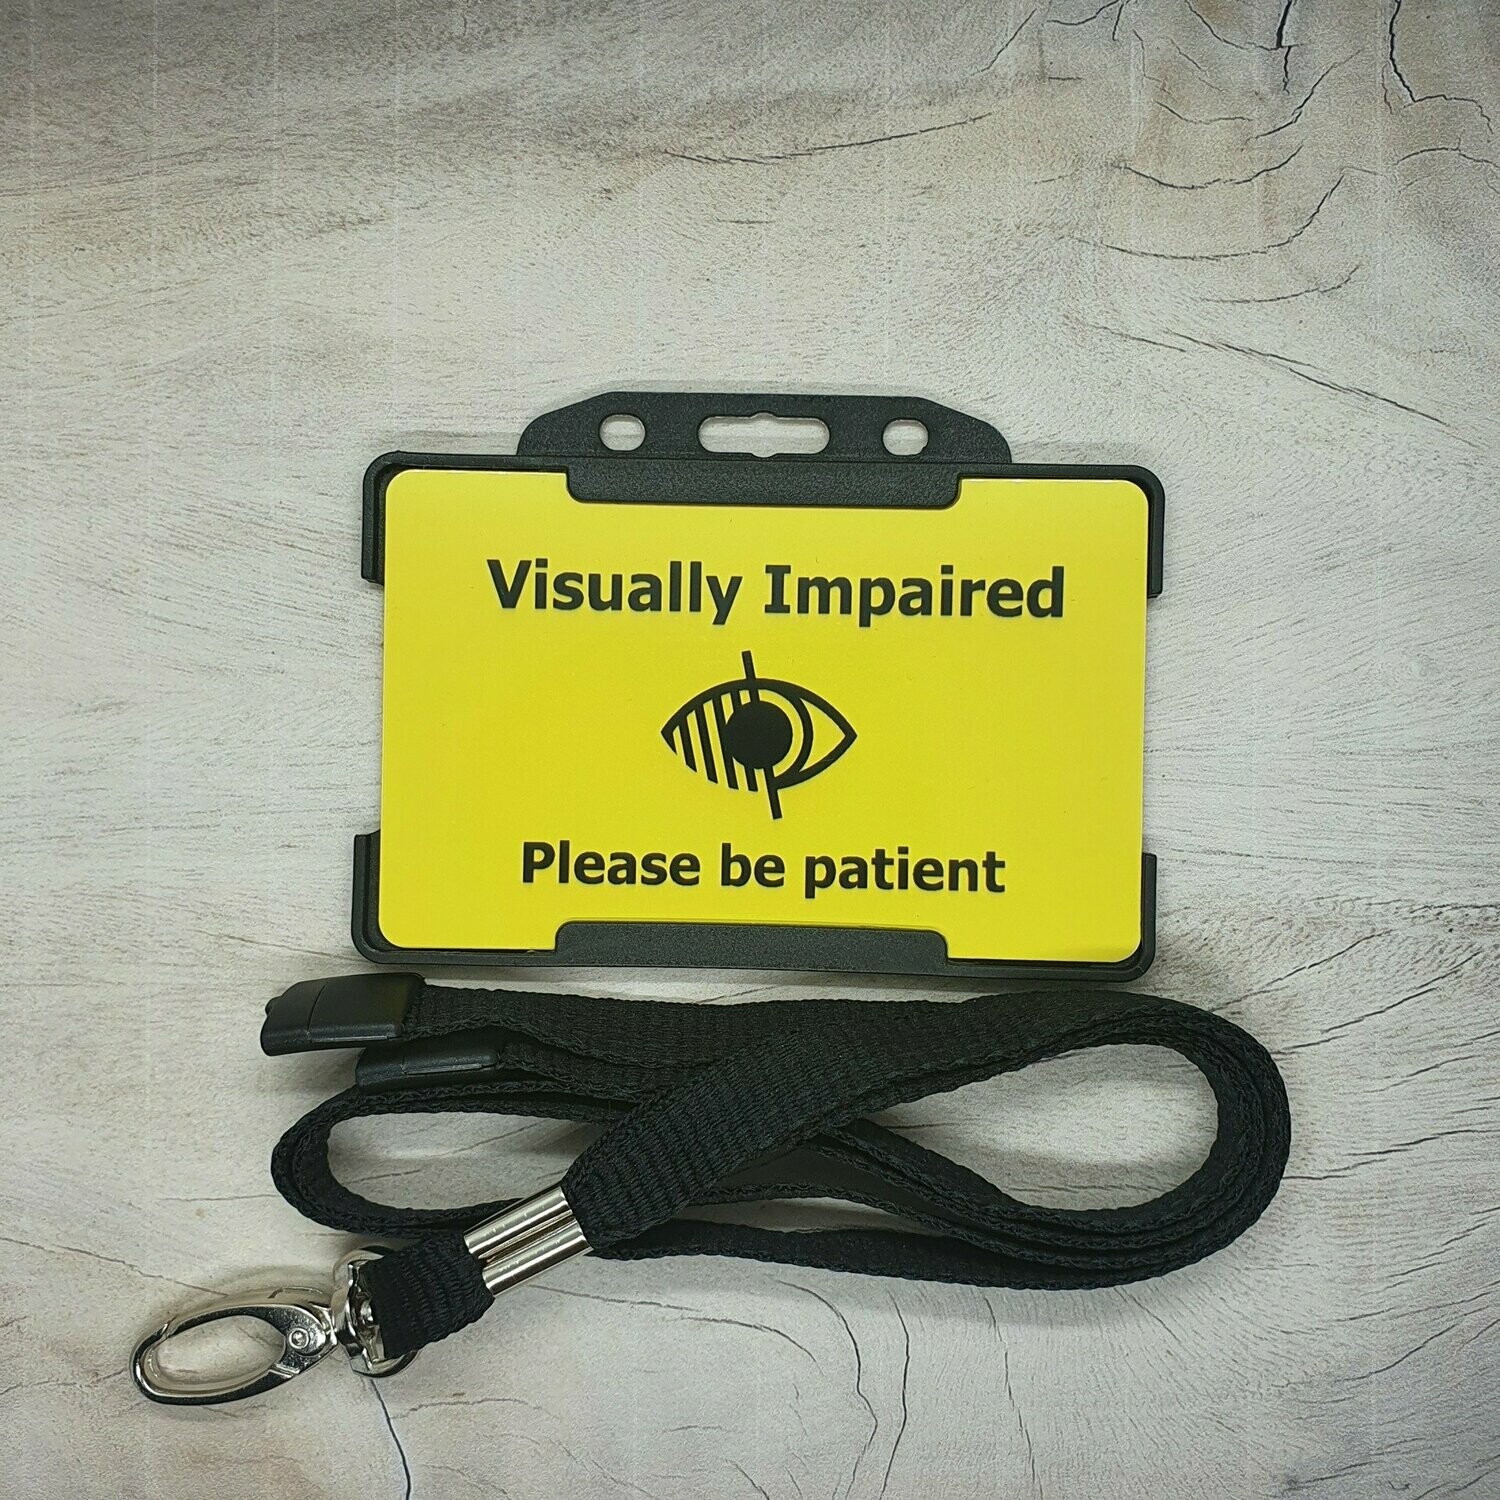 Visually Impaired Visual Impairment ID Card with Lanyard Hidden ...